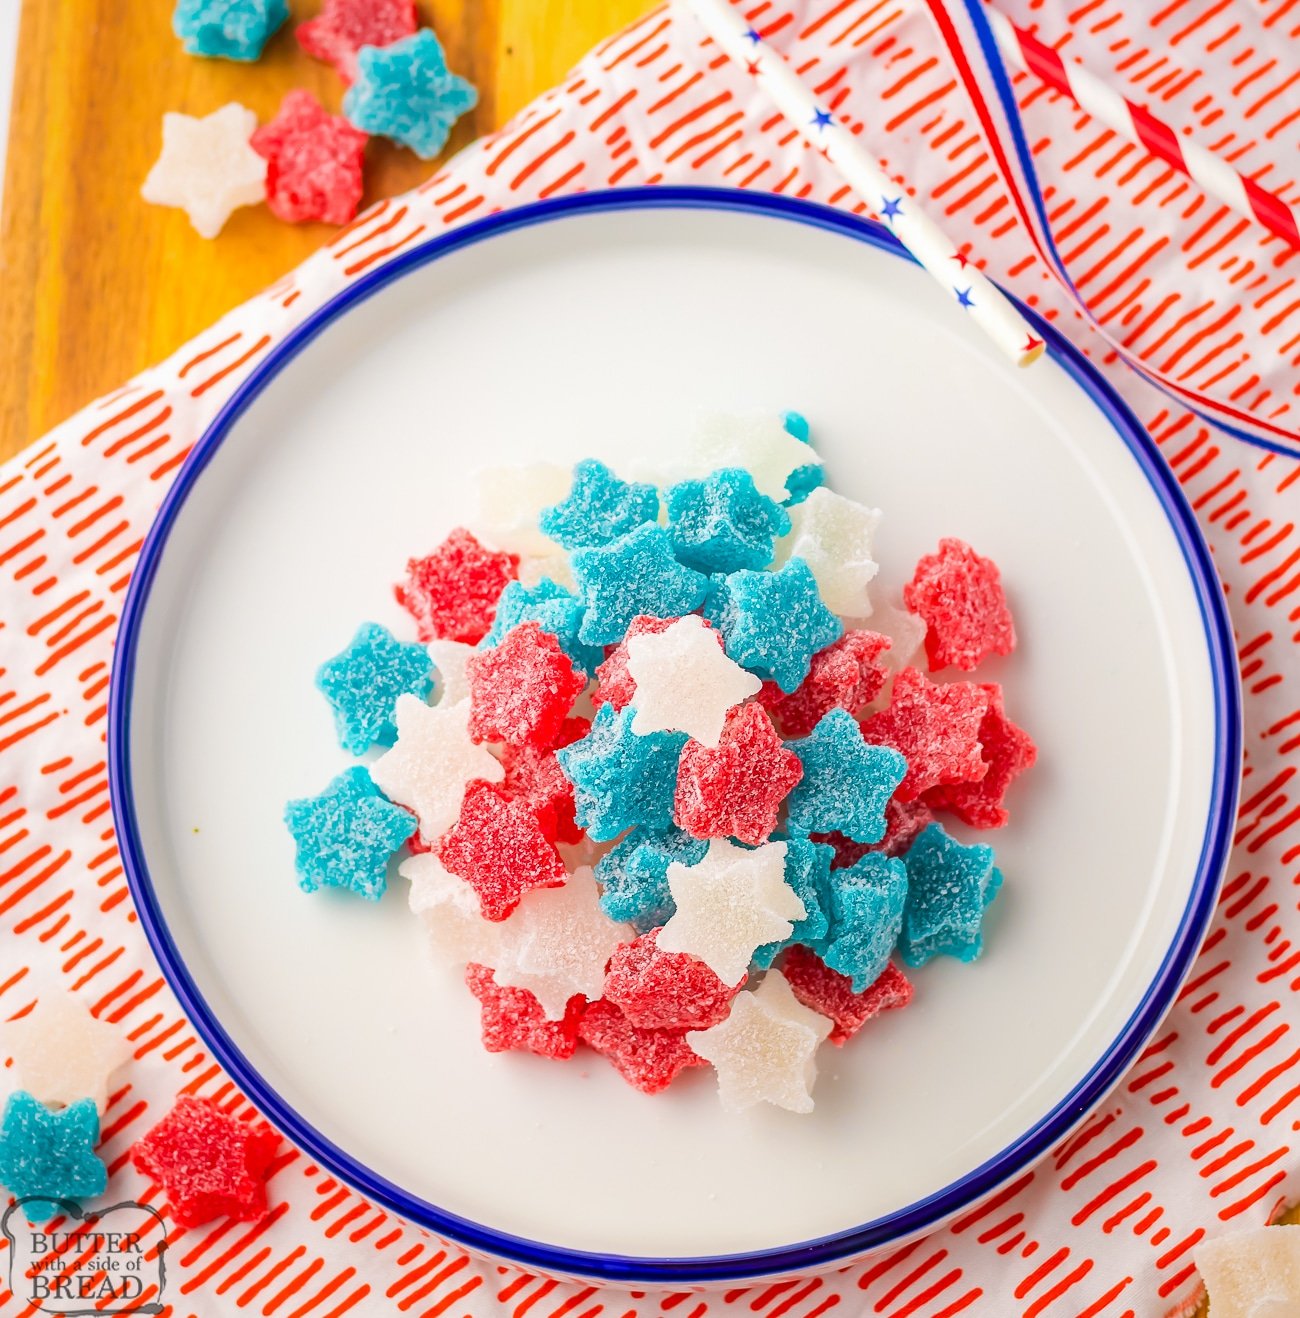 plateful of patriotic gumdrop candies made with jello and applesauce